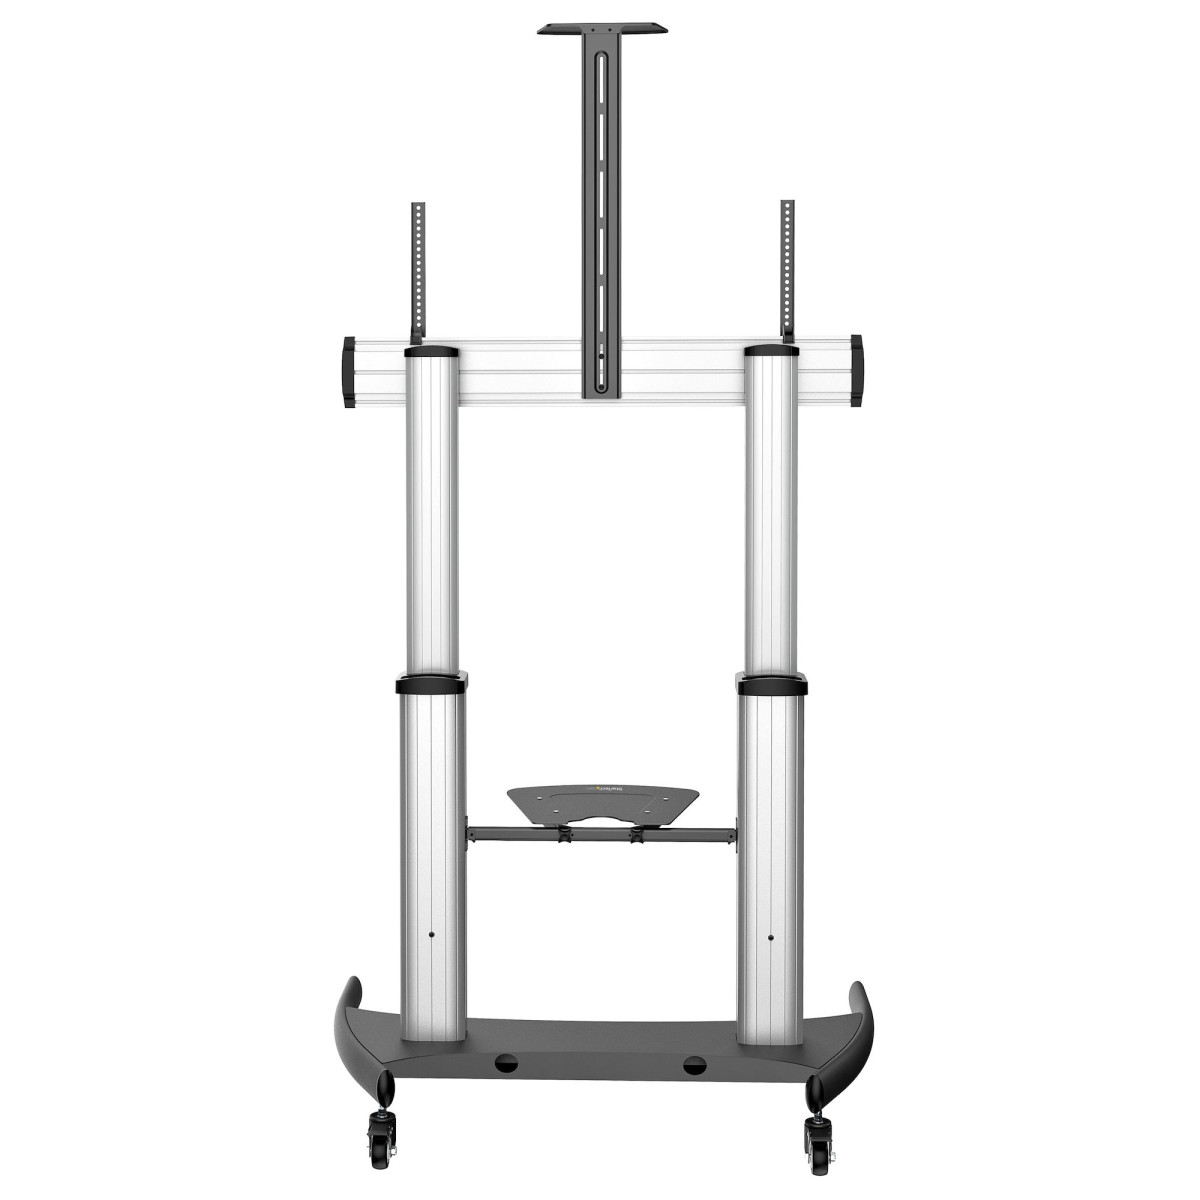 Mobile TV Stand Cart 60-100in Display